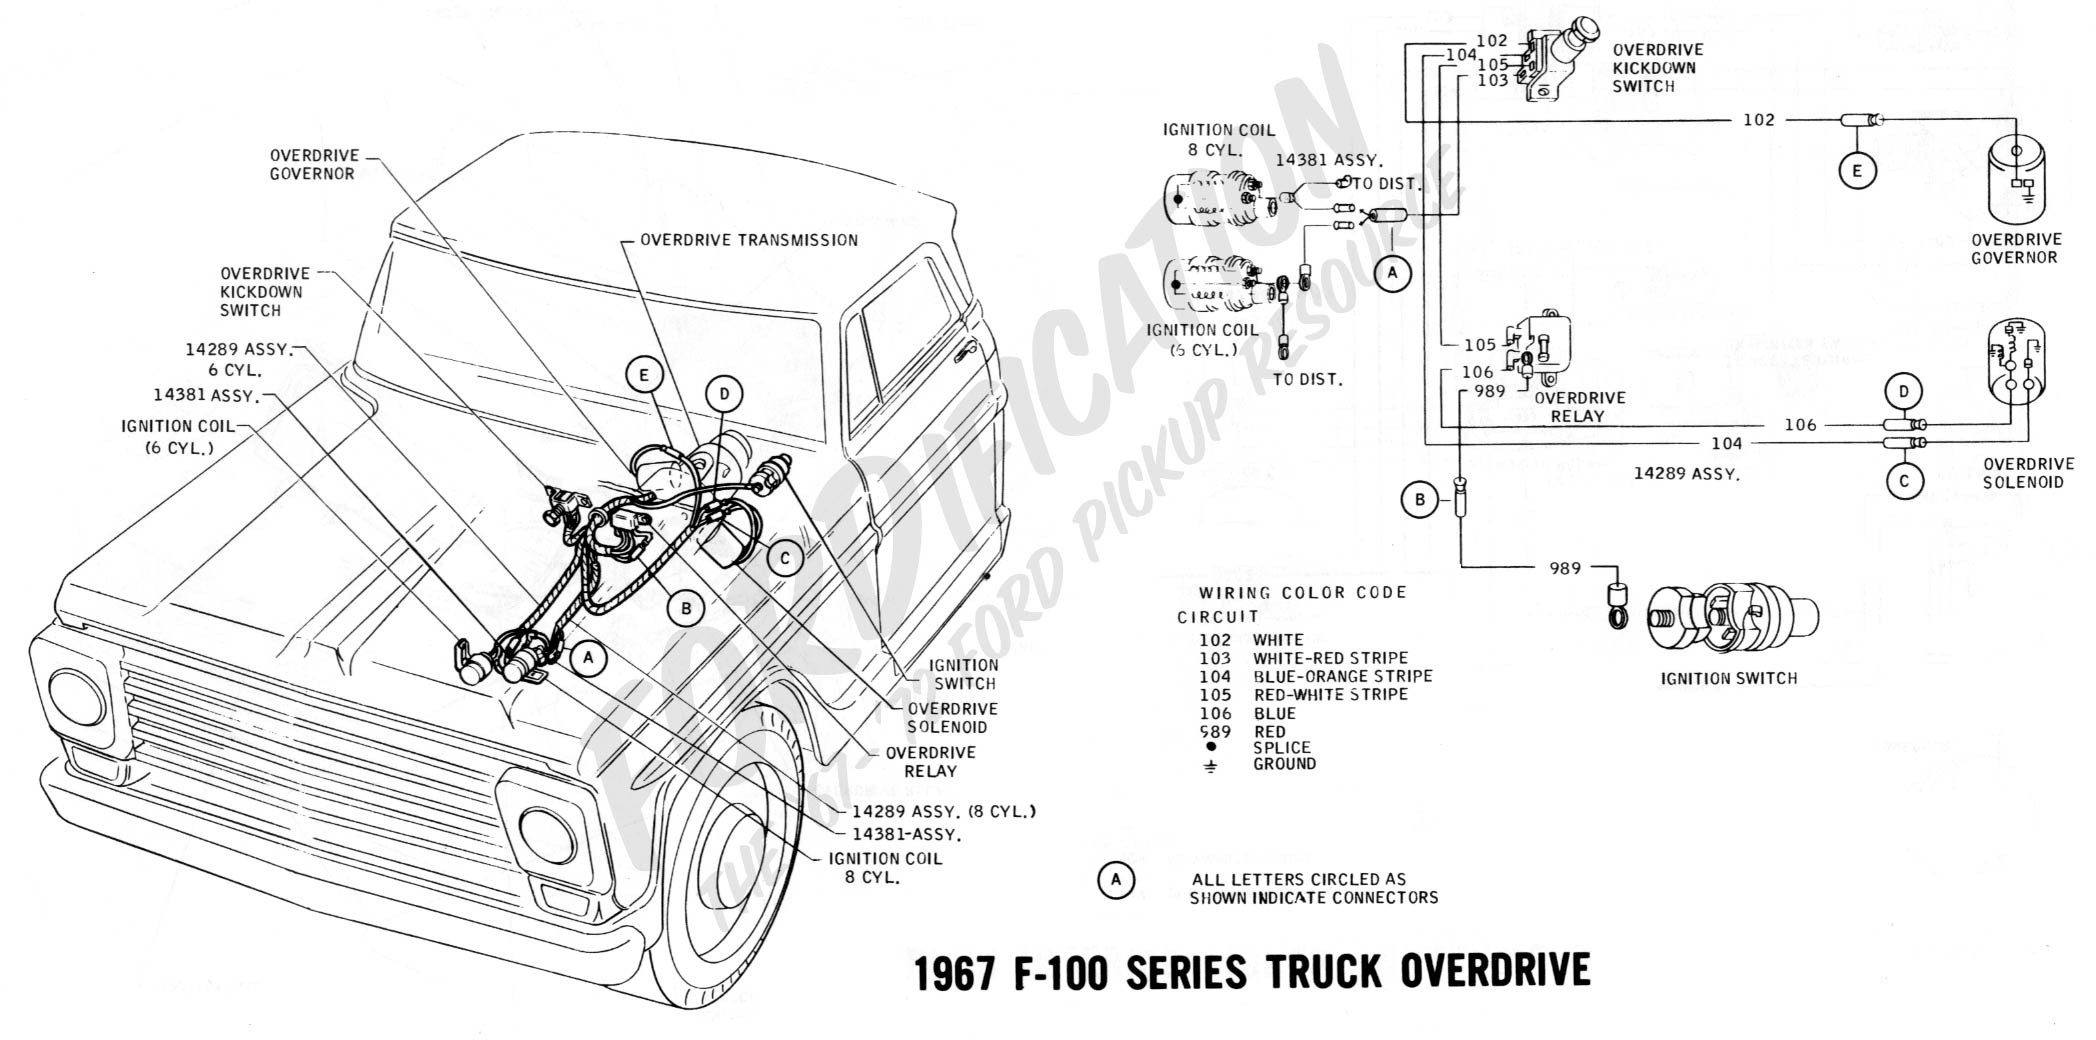 Ford Truck Parts Diagram ford Truck Technical Drawings and Schematics Section H Wiring Of Ford Truck Parts Diagram